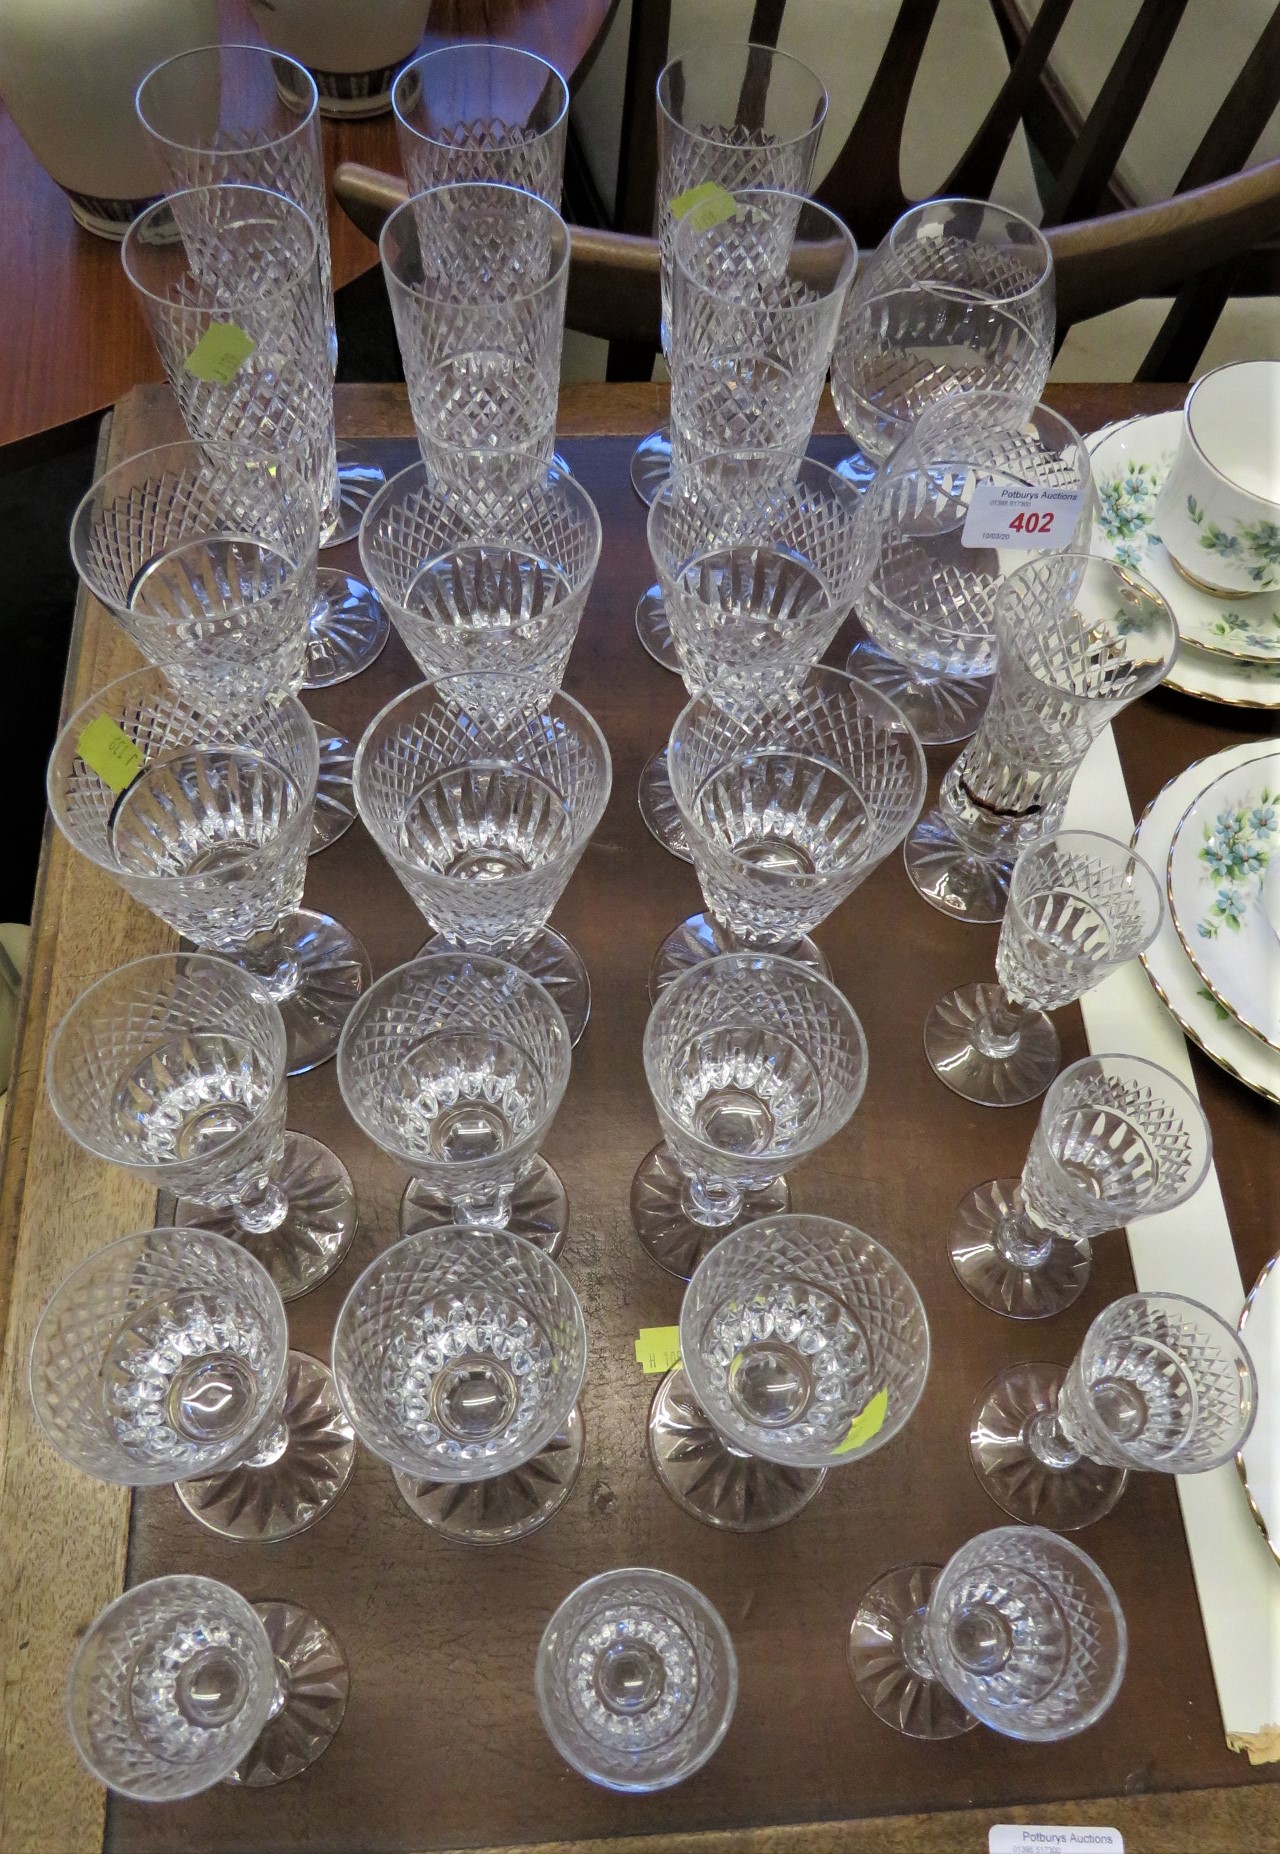 CUT CRYSTAL DRINKING GLASSES INCLUDING WINE AND BRANDY - Image 3 of 3